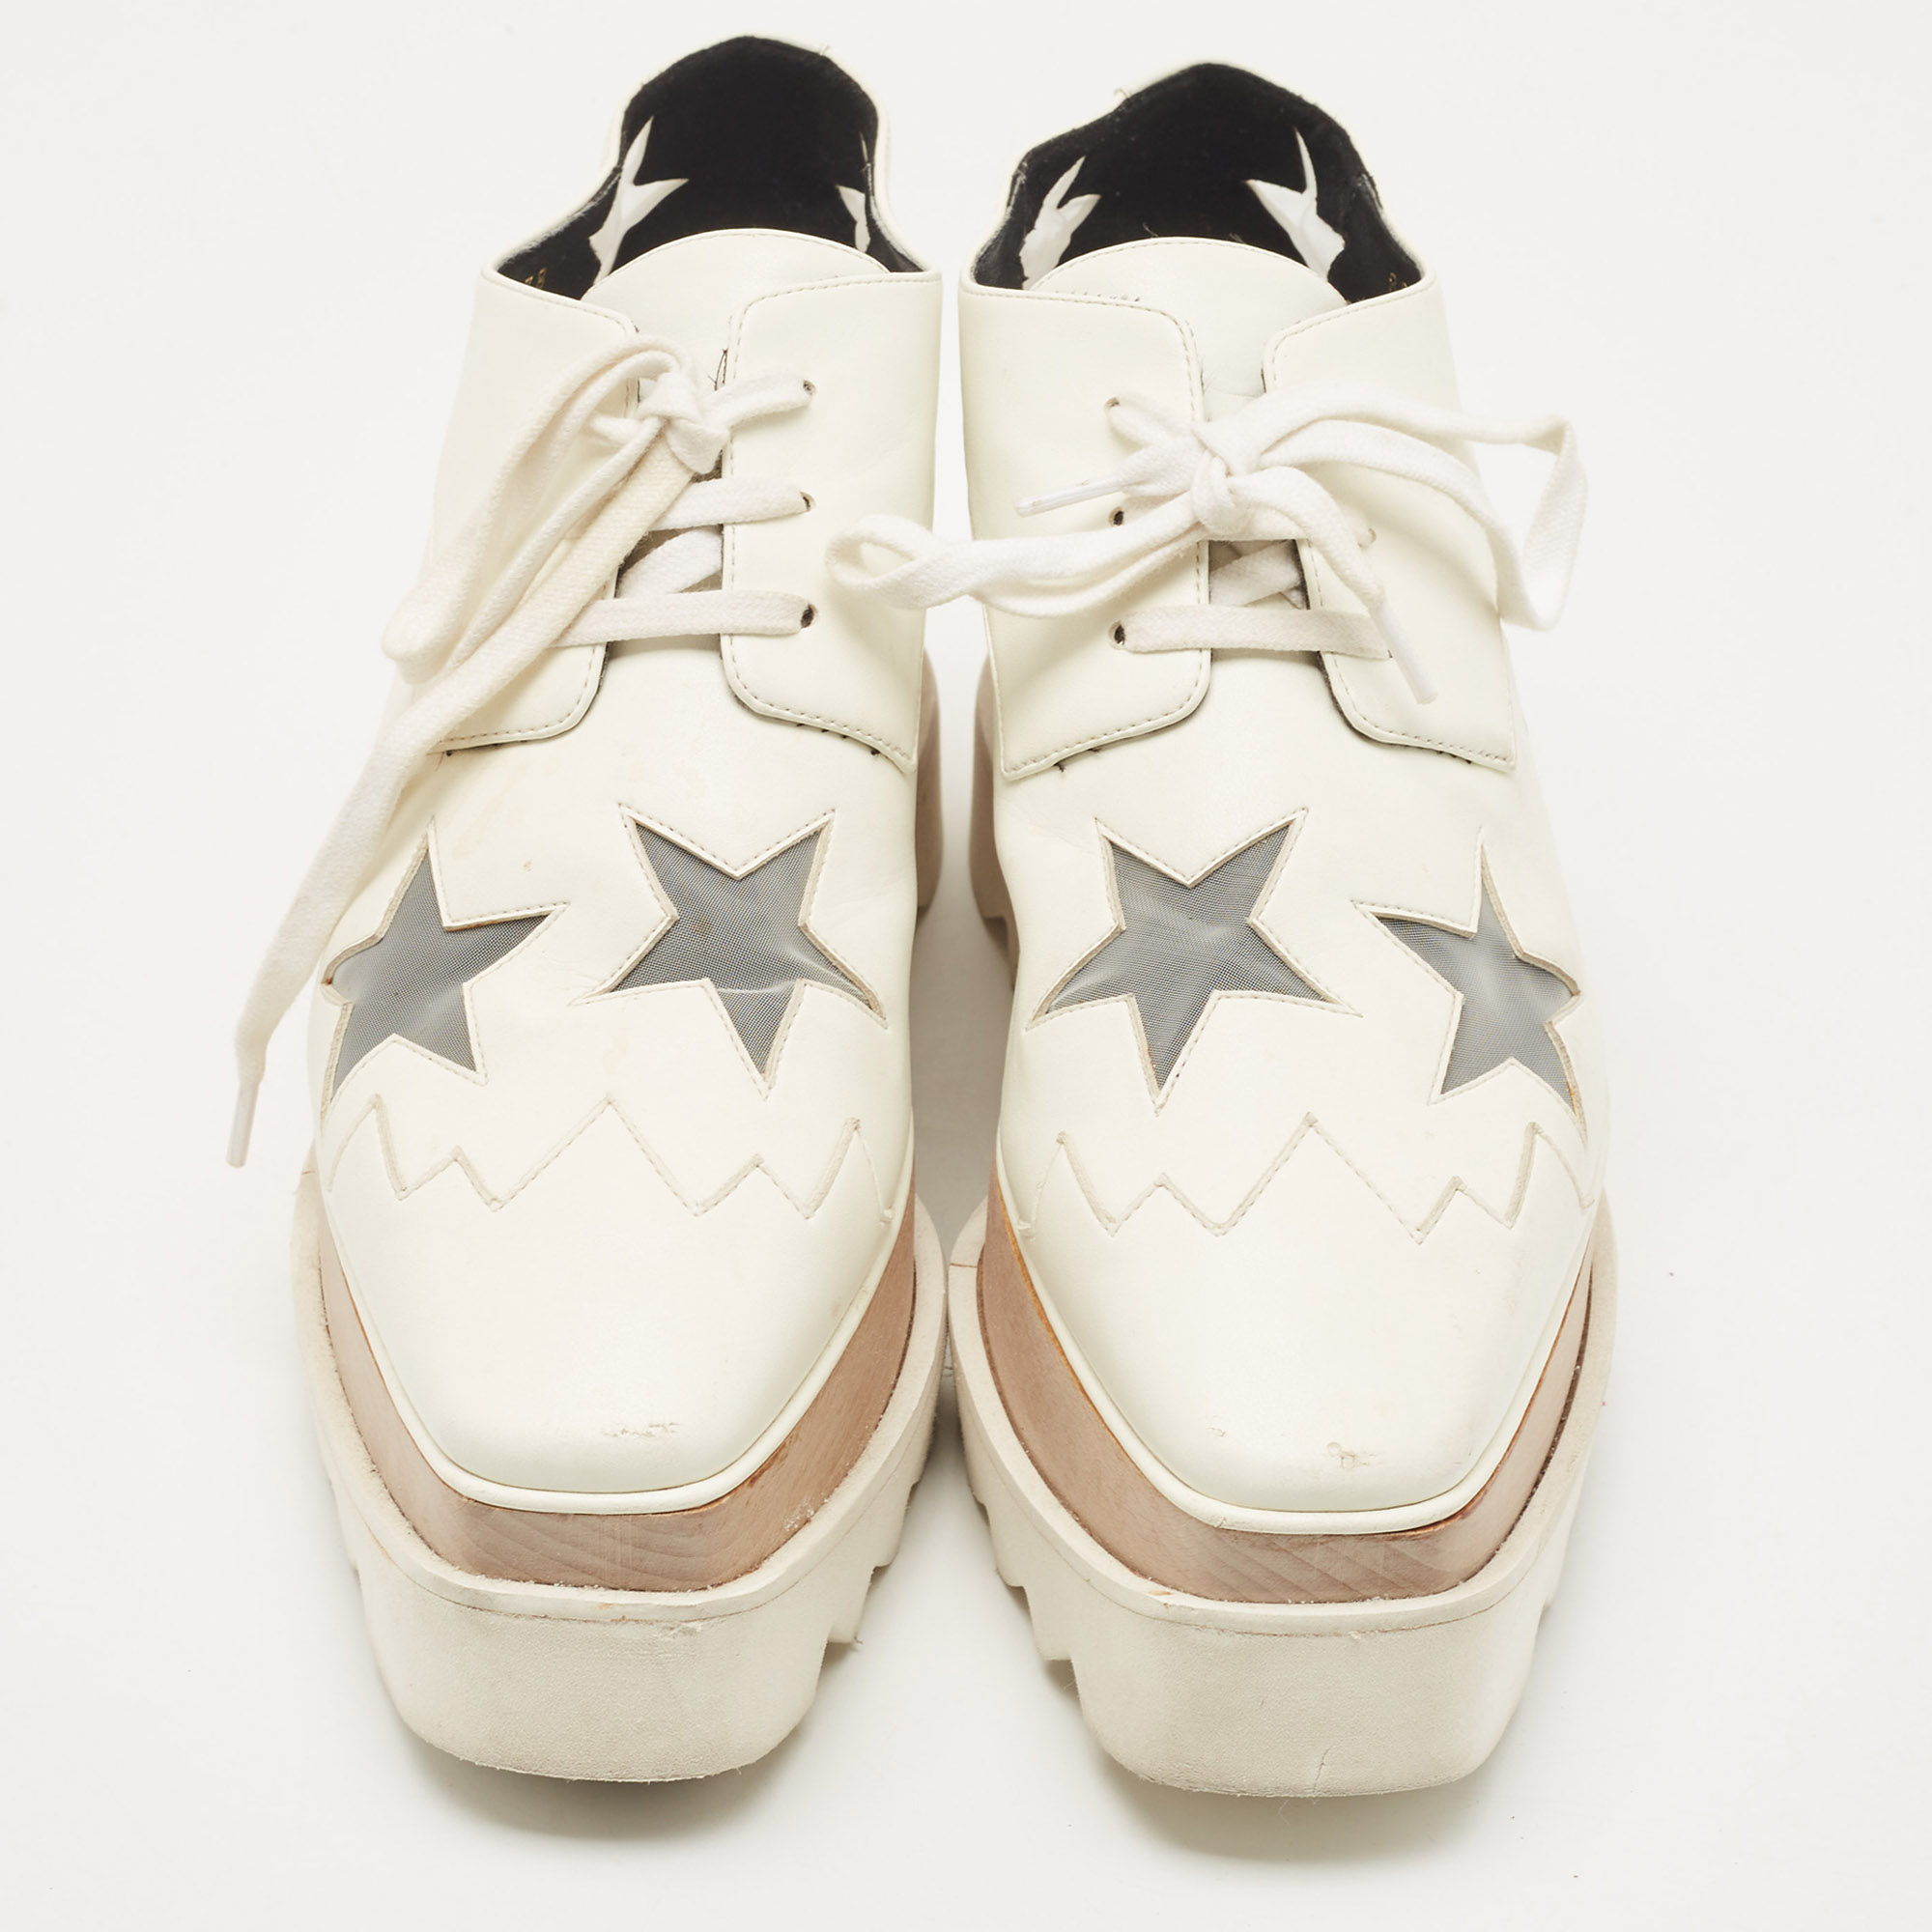 Stella McCartney White Faux Leather And Mesh Elyse Star Platform Derby Sneakers Size 38